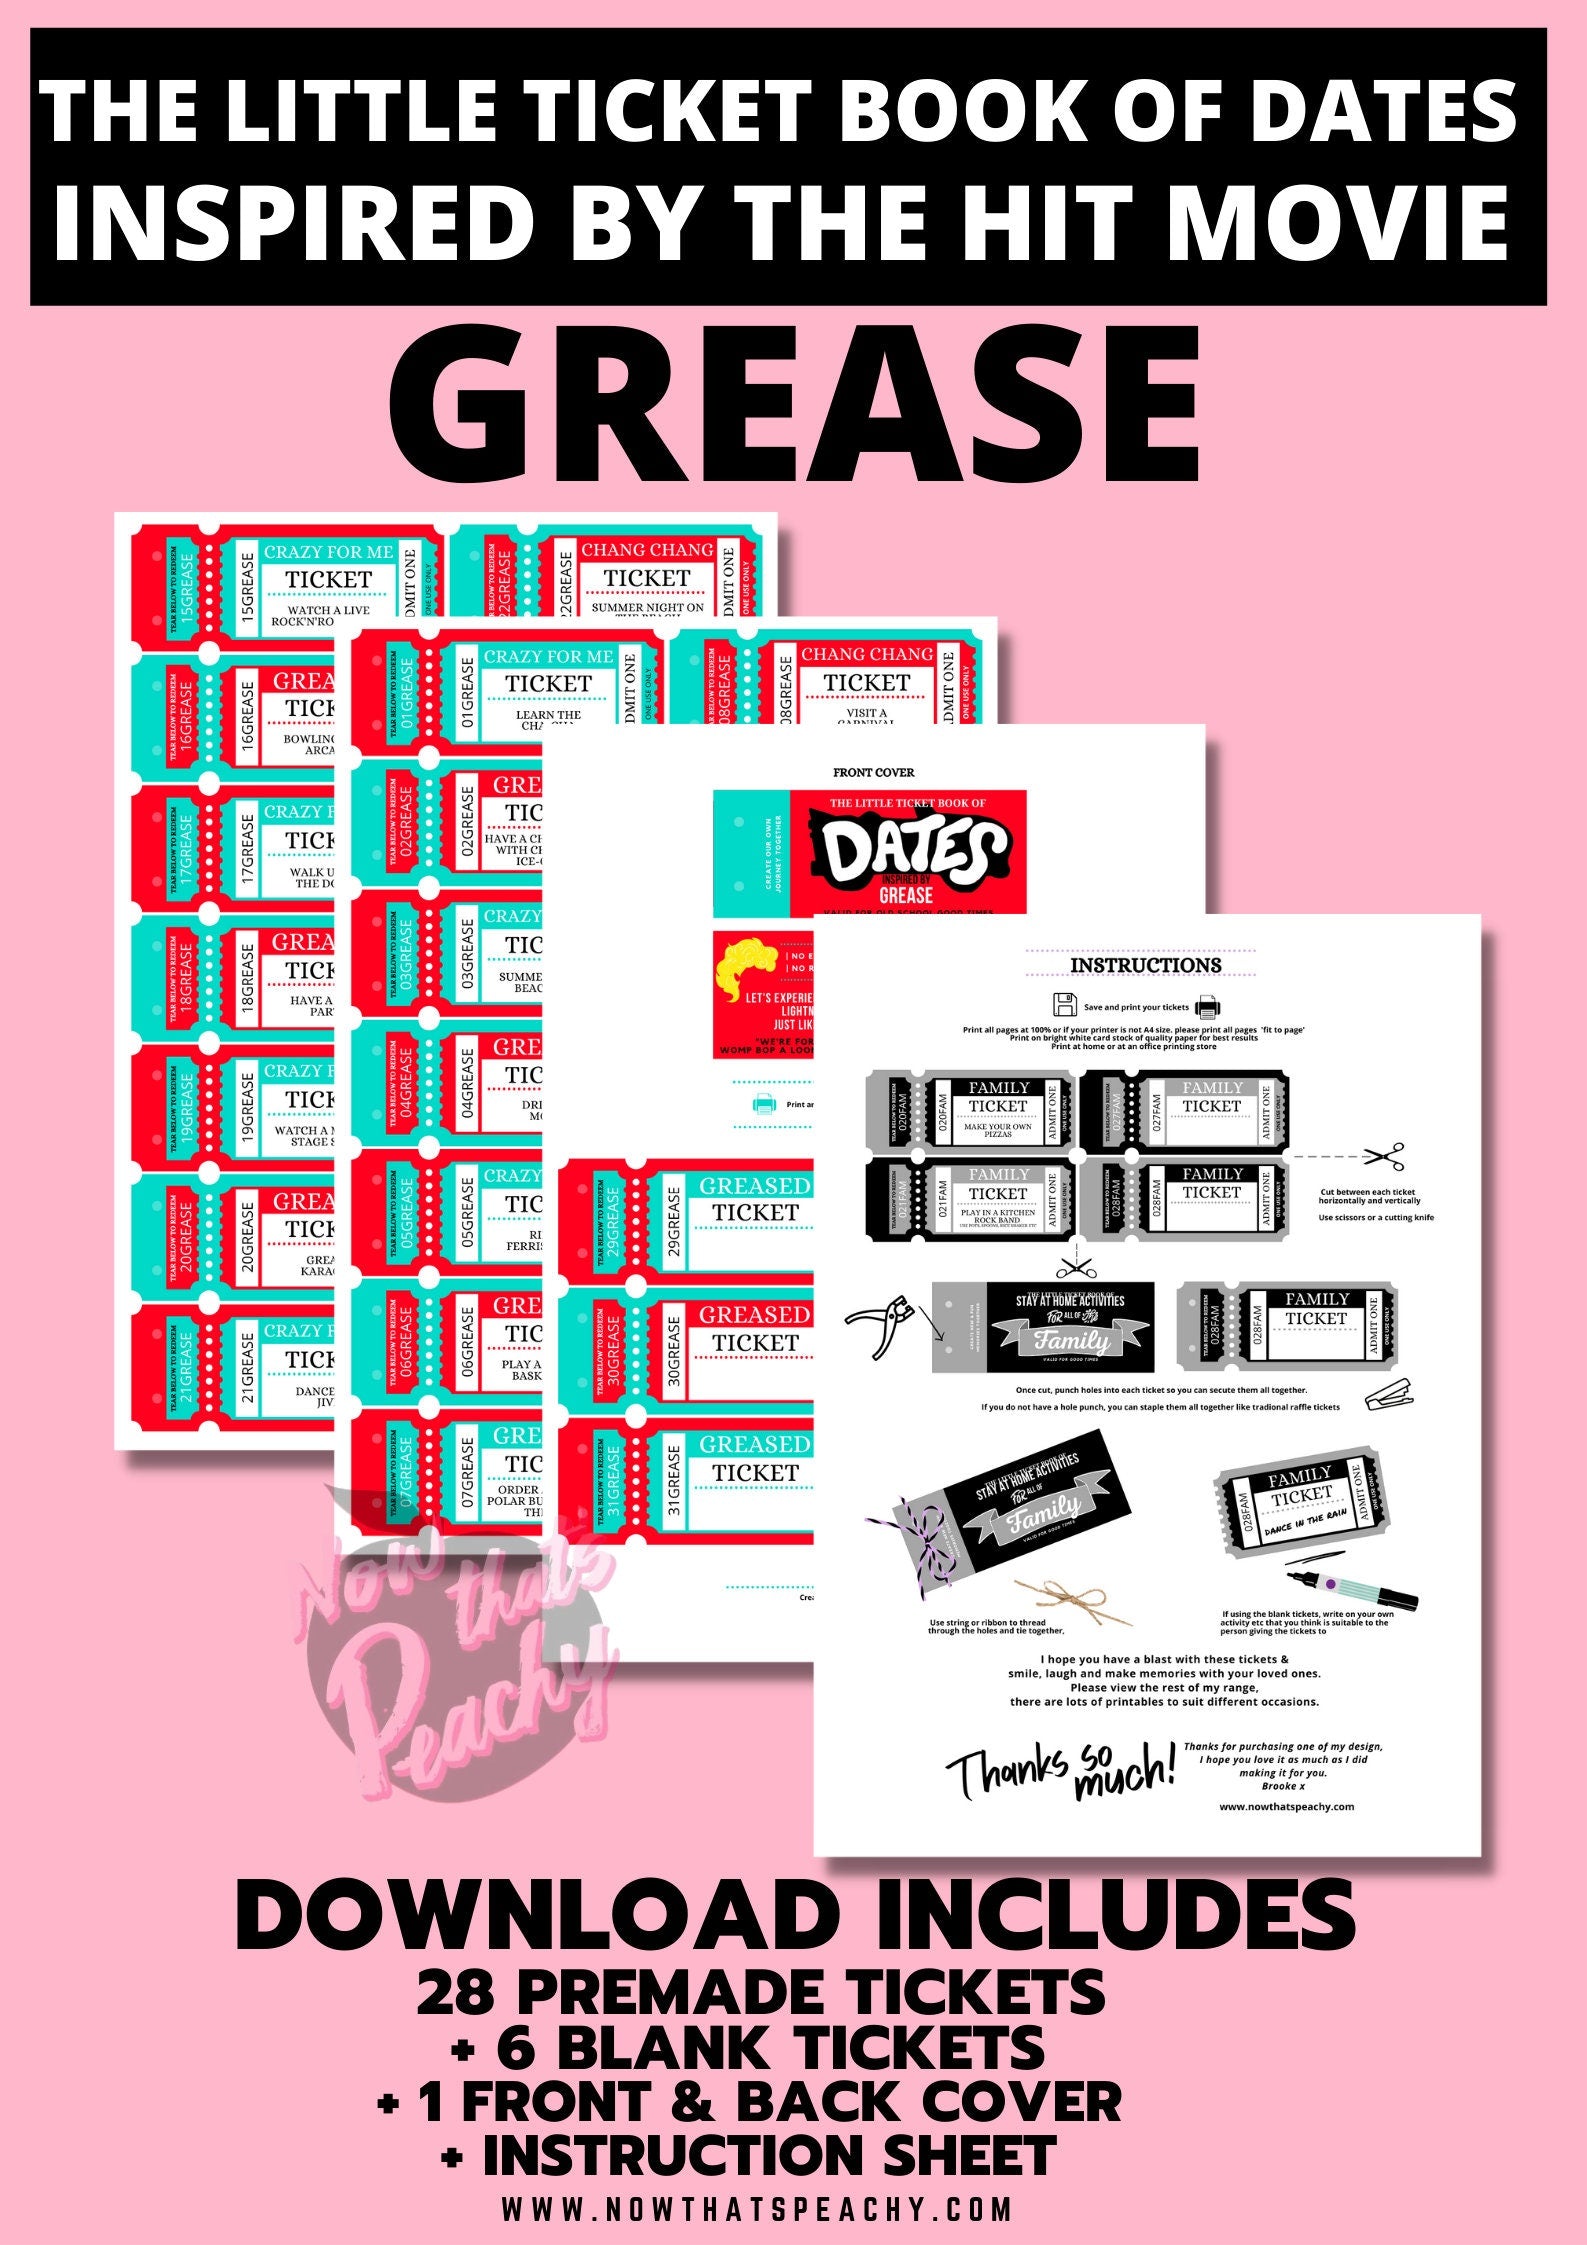 Shop for Grease Movie date night ideas Ticket Voucher Coupon book printable DIY Template couple date night weekend treat appreciation print off musical 70s 50s 1950s diner rocknroll fans valentines anniversary wife husband digital download fun cute idea present Birthday print off retro vintage theme night out boyfriend girlfriend partner mrs mr miss lady girl man male female adult explore anti vday  product shop easy cheap affordable personalized custom wedding bride to be gifts inspiration